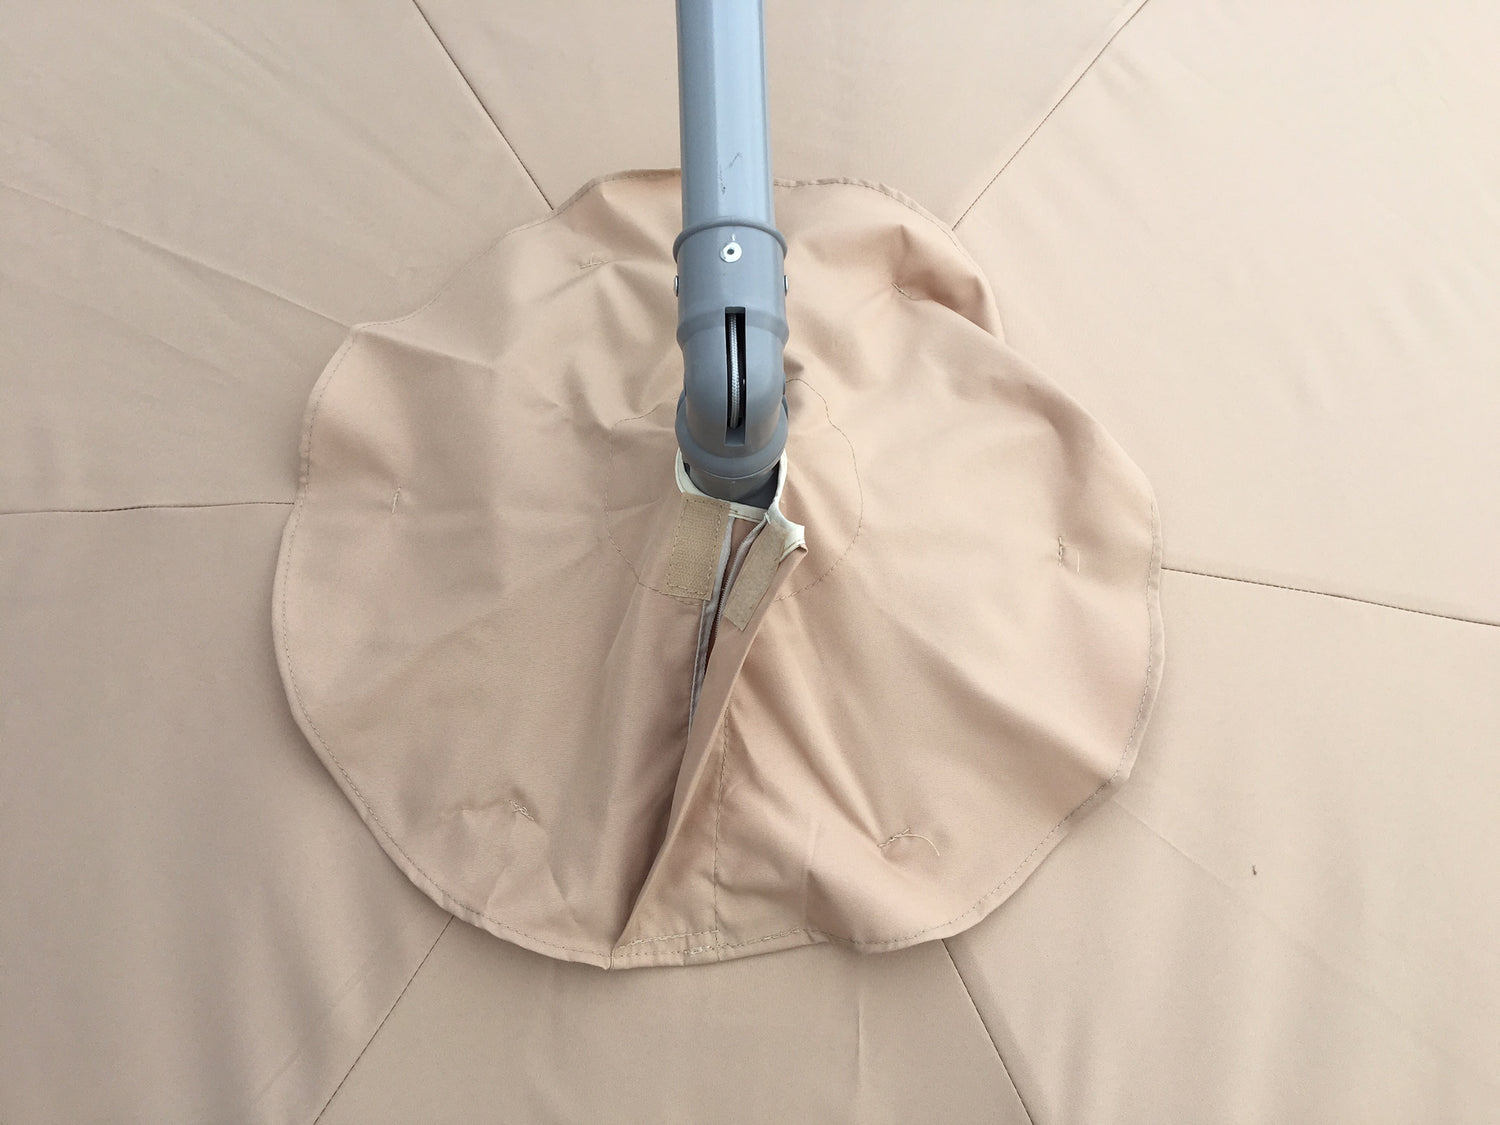 Ikea Karlso Parasol Replacement Canopy 990.484.37 Top opening